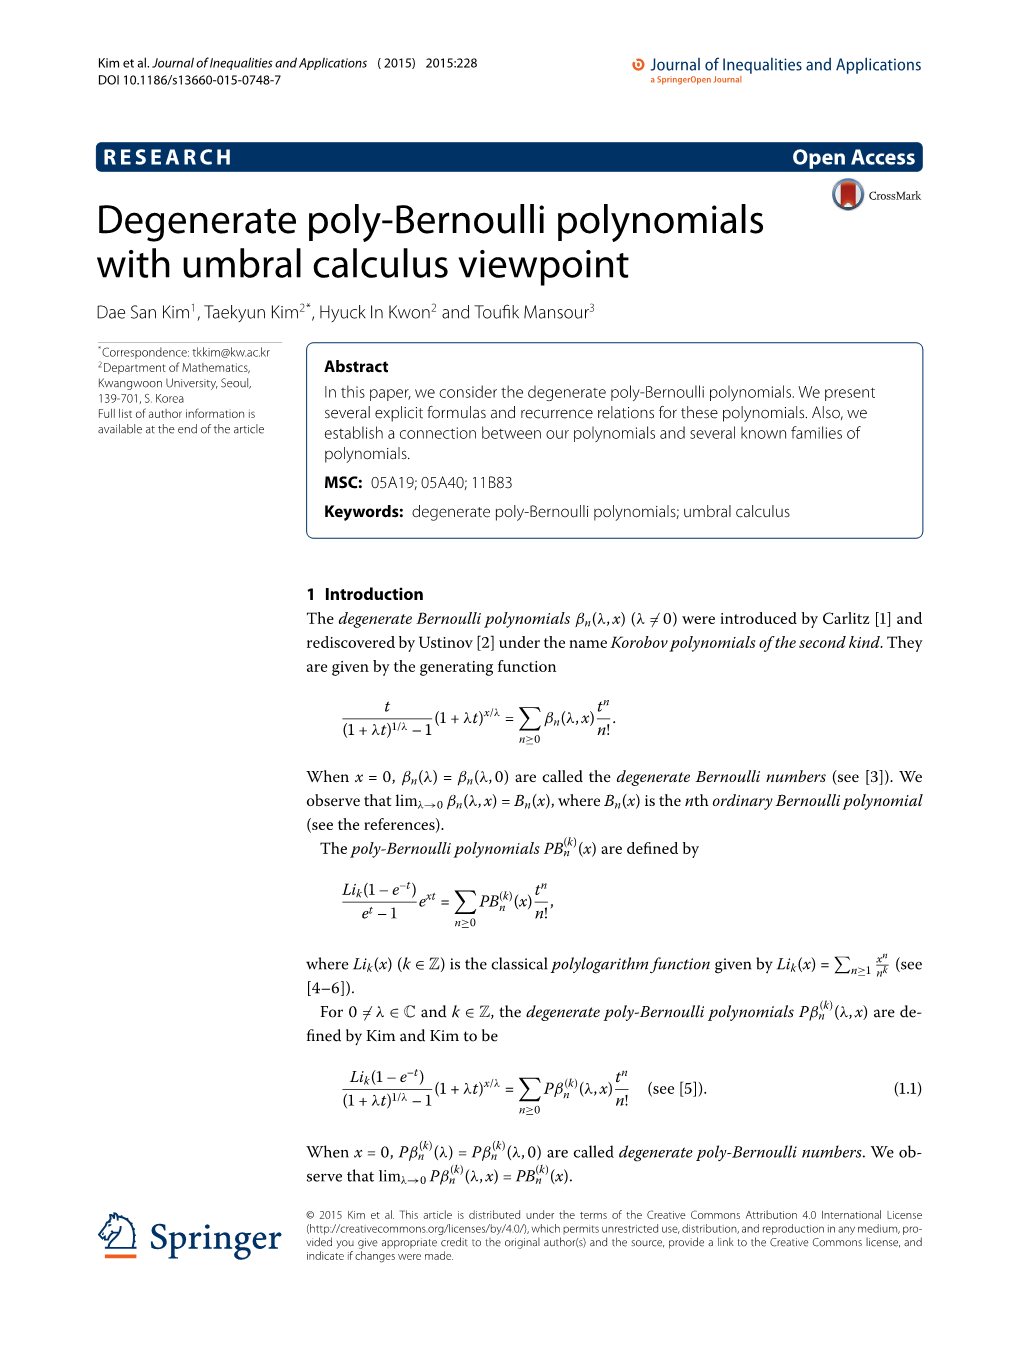 Degenerate Poly-Bernoulli Polynomials with Umbral Calculus Viewpoint Dae San Kim1,Taekyunkim2*, Hyuck in Kwon2 and Touﬁk Mansour3